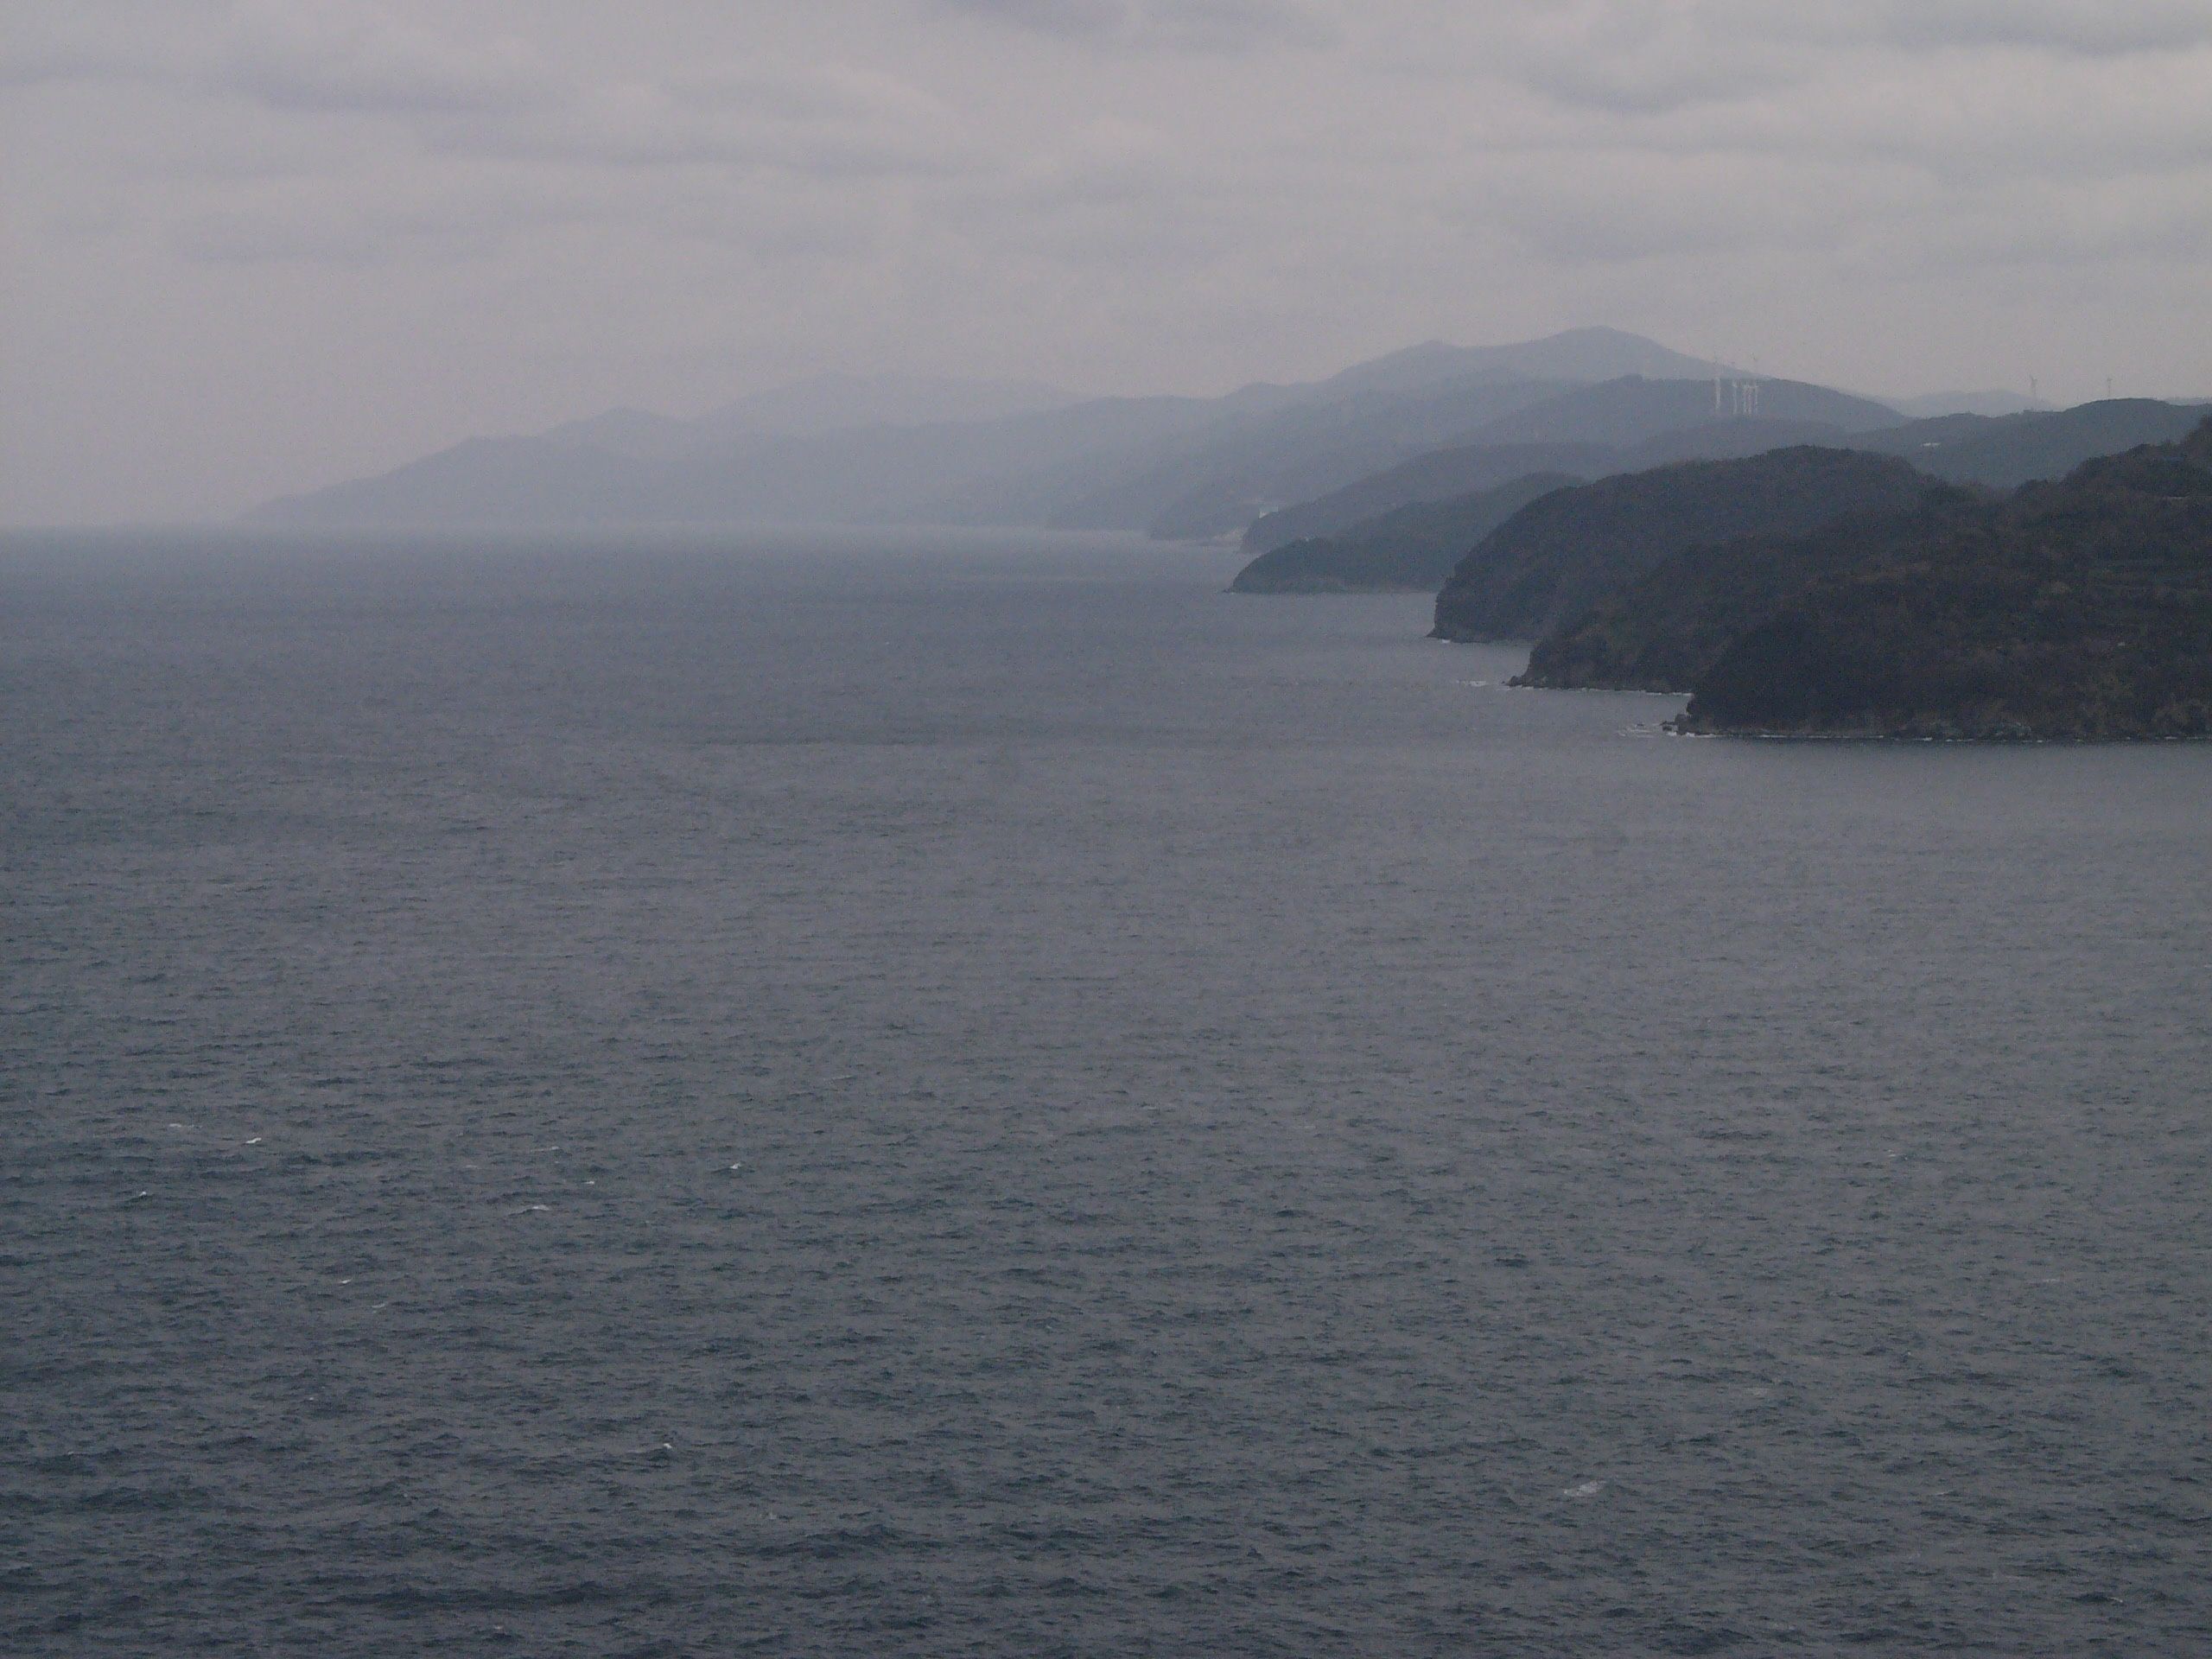 Panorama of a series of small peninsulas on a grey sea.